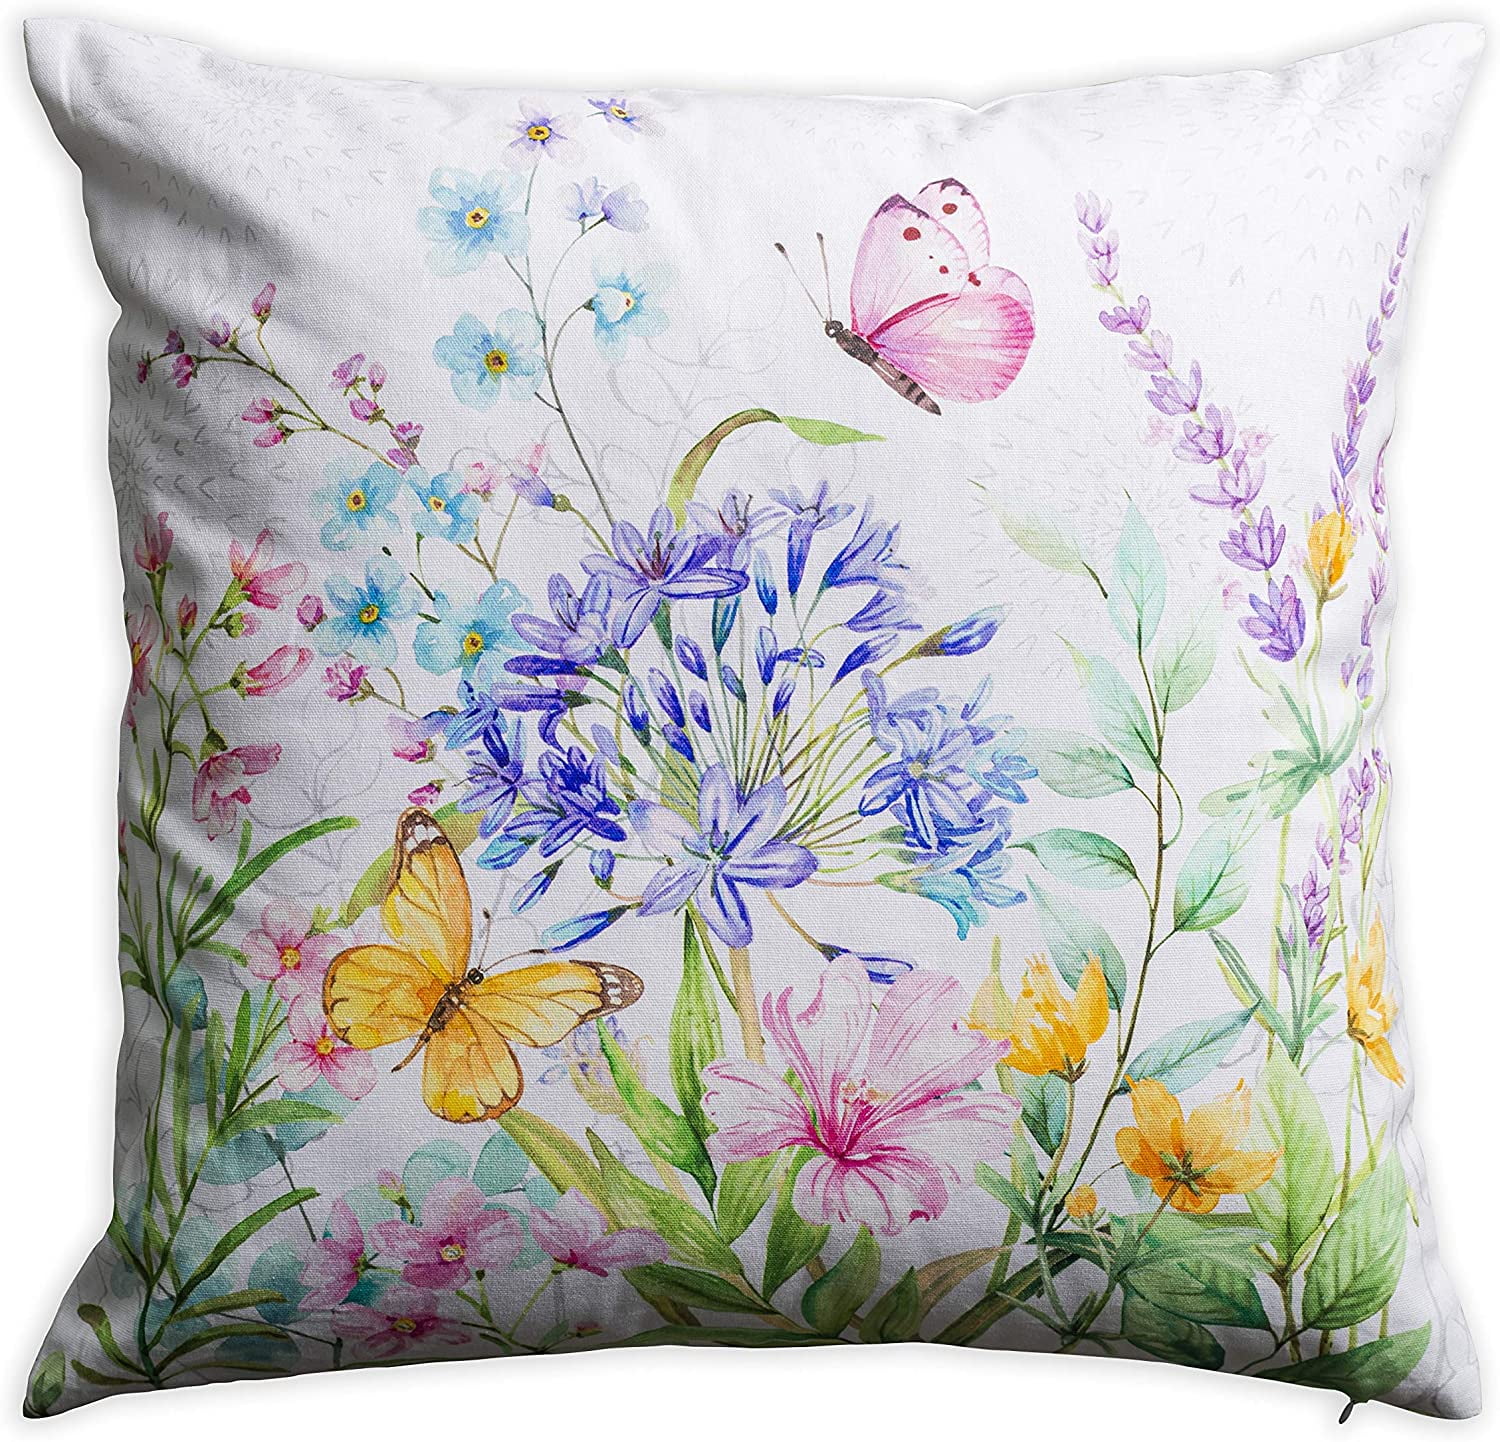 Bedroom Living Room Home Sofa Samba, 20 Inch by 20 Inch Cushion Covers Maison d' Hermine Katmandou 100% Cotton Decorative Pillow Cover for Couch 